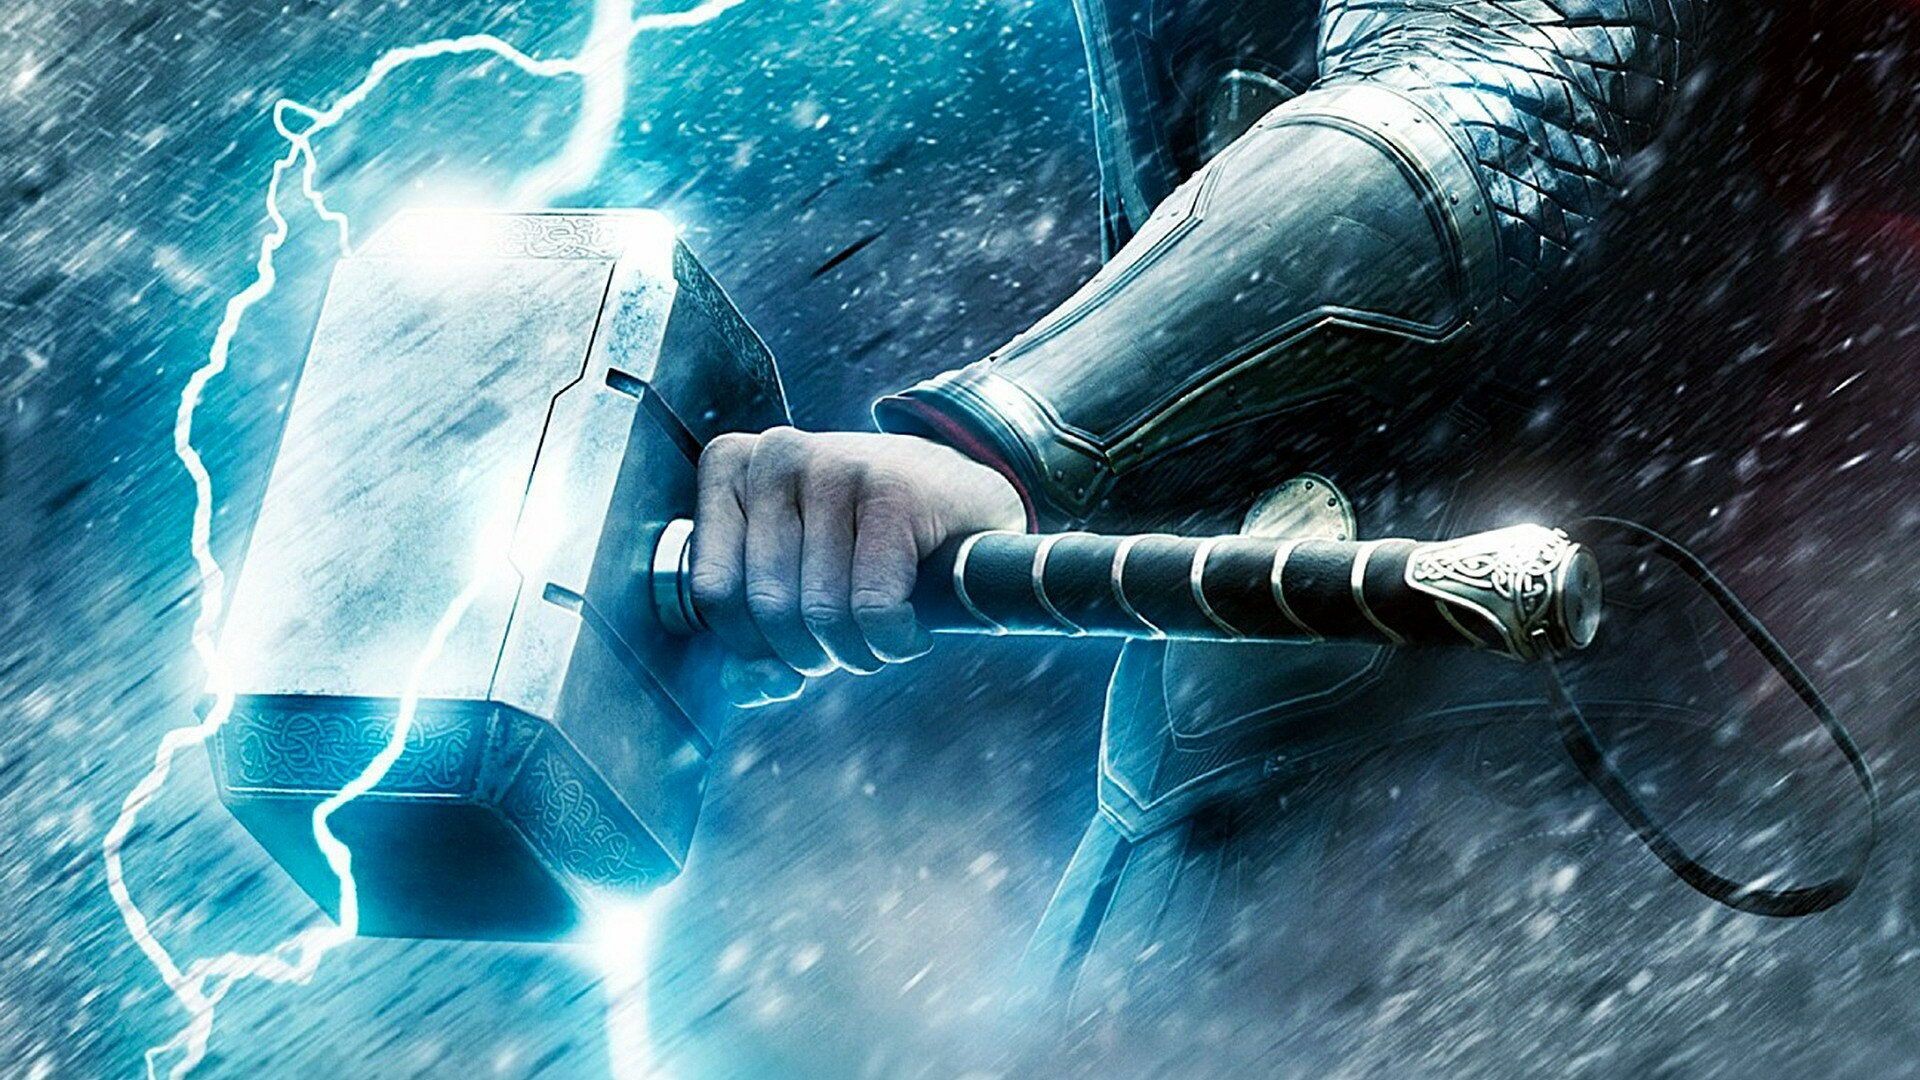 Thor: Love and Thunder: Mjolnir, Hammer, Used in the battle against Gorr the God Butcher and his forces. 1920x1080 Full HD Background.